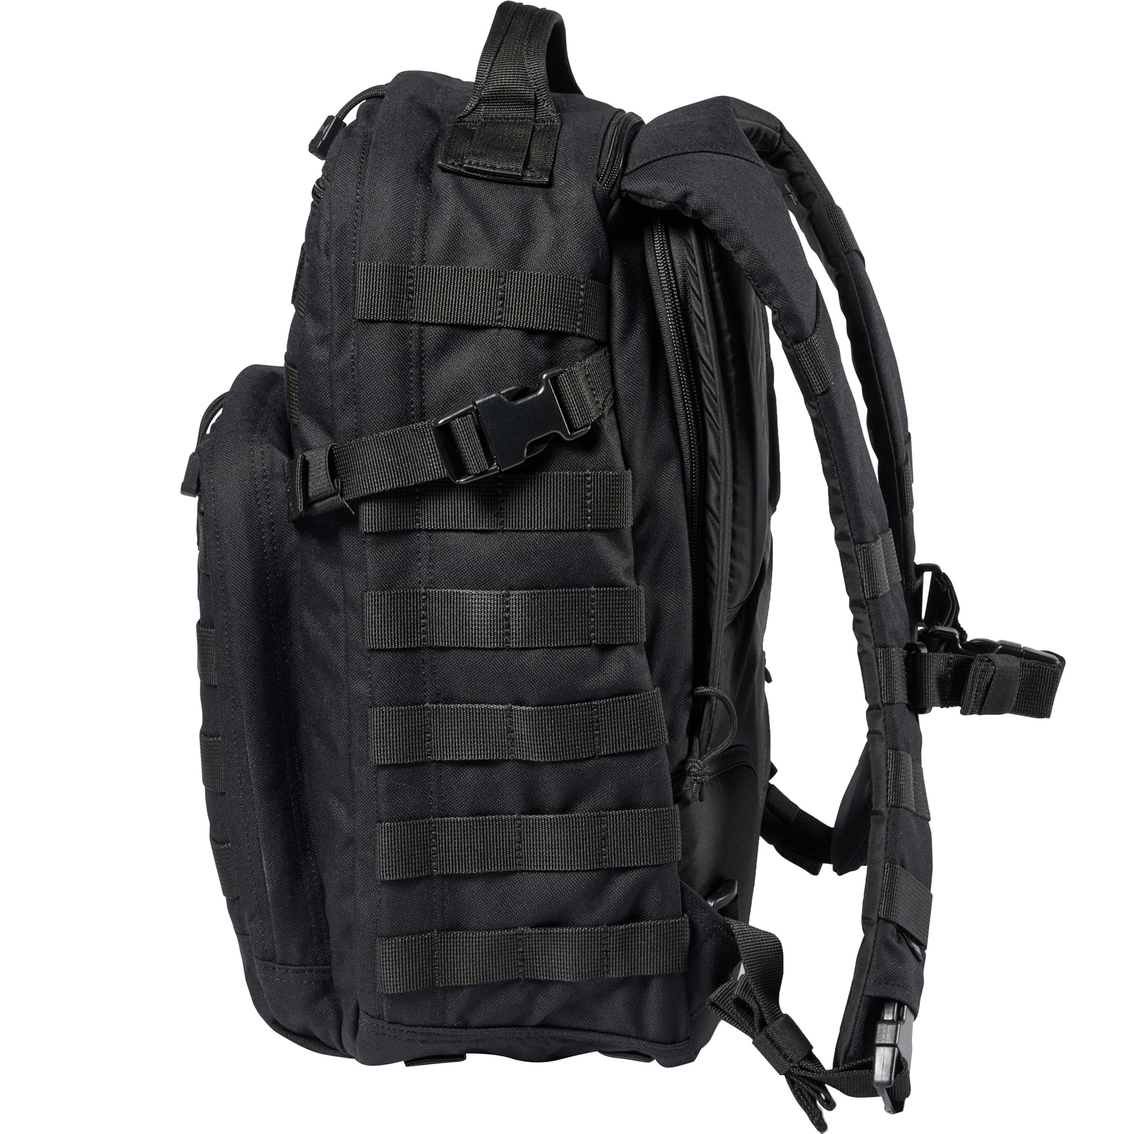 5.11 RUSH 12 2.0 Backpack - Image 6 of 10